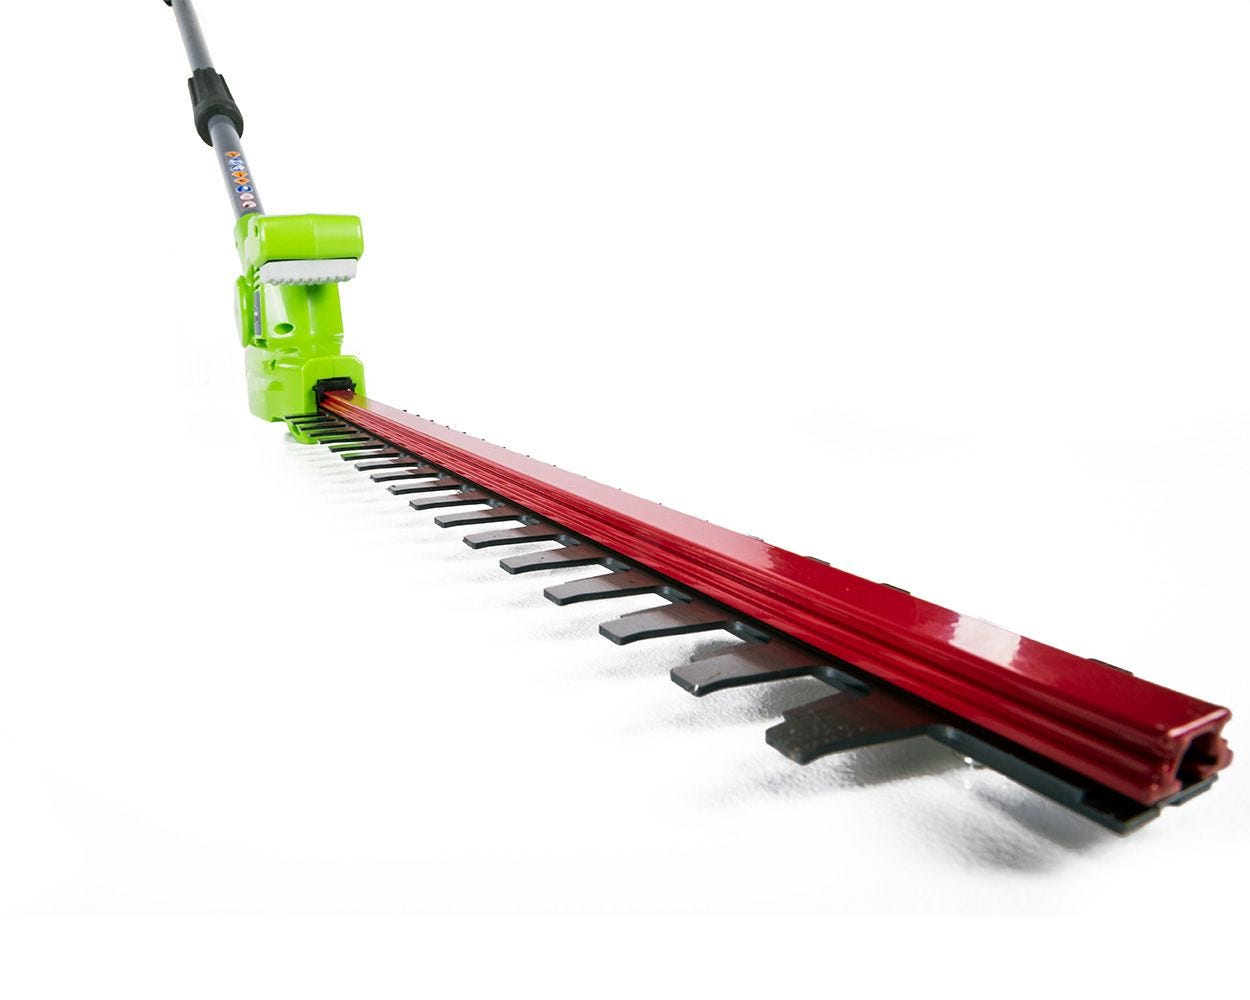 40V 8-Inch Cordless Pole Saw with Hedge Trimmer Attachment | Greenworks